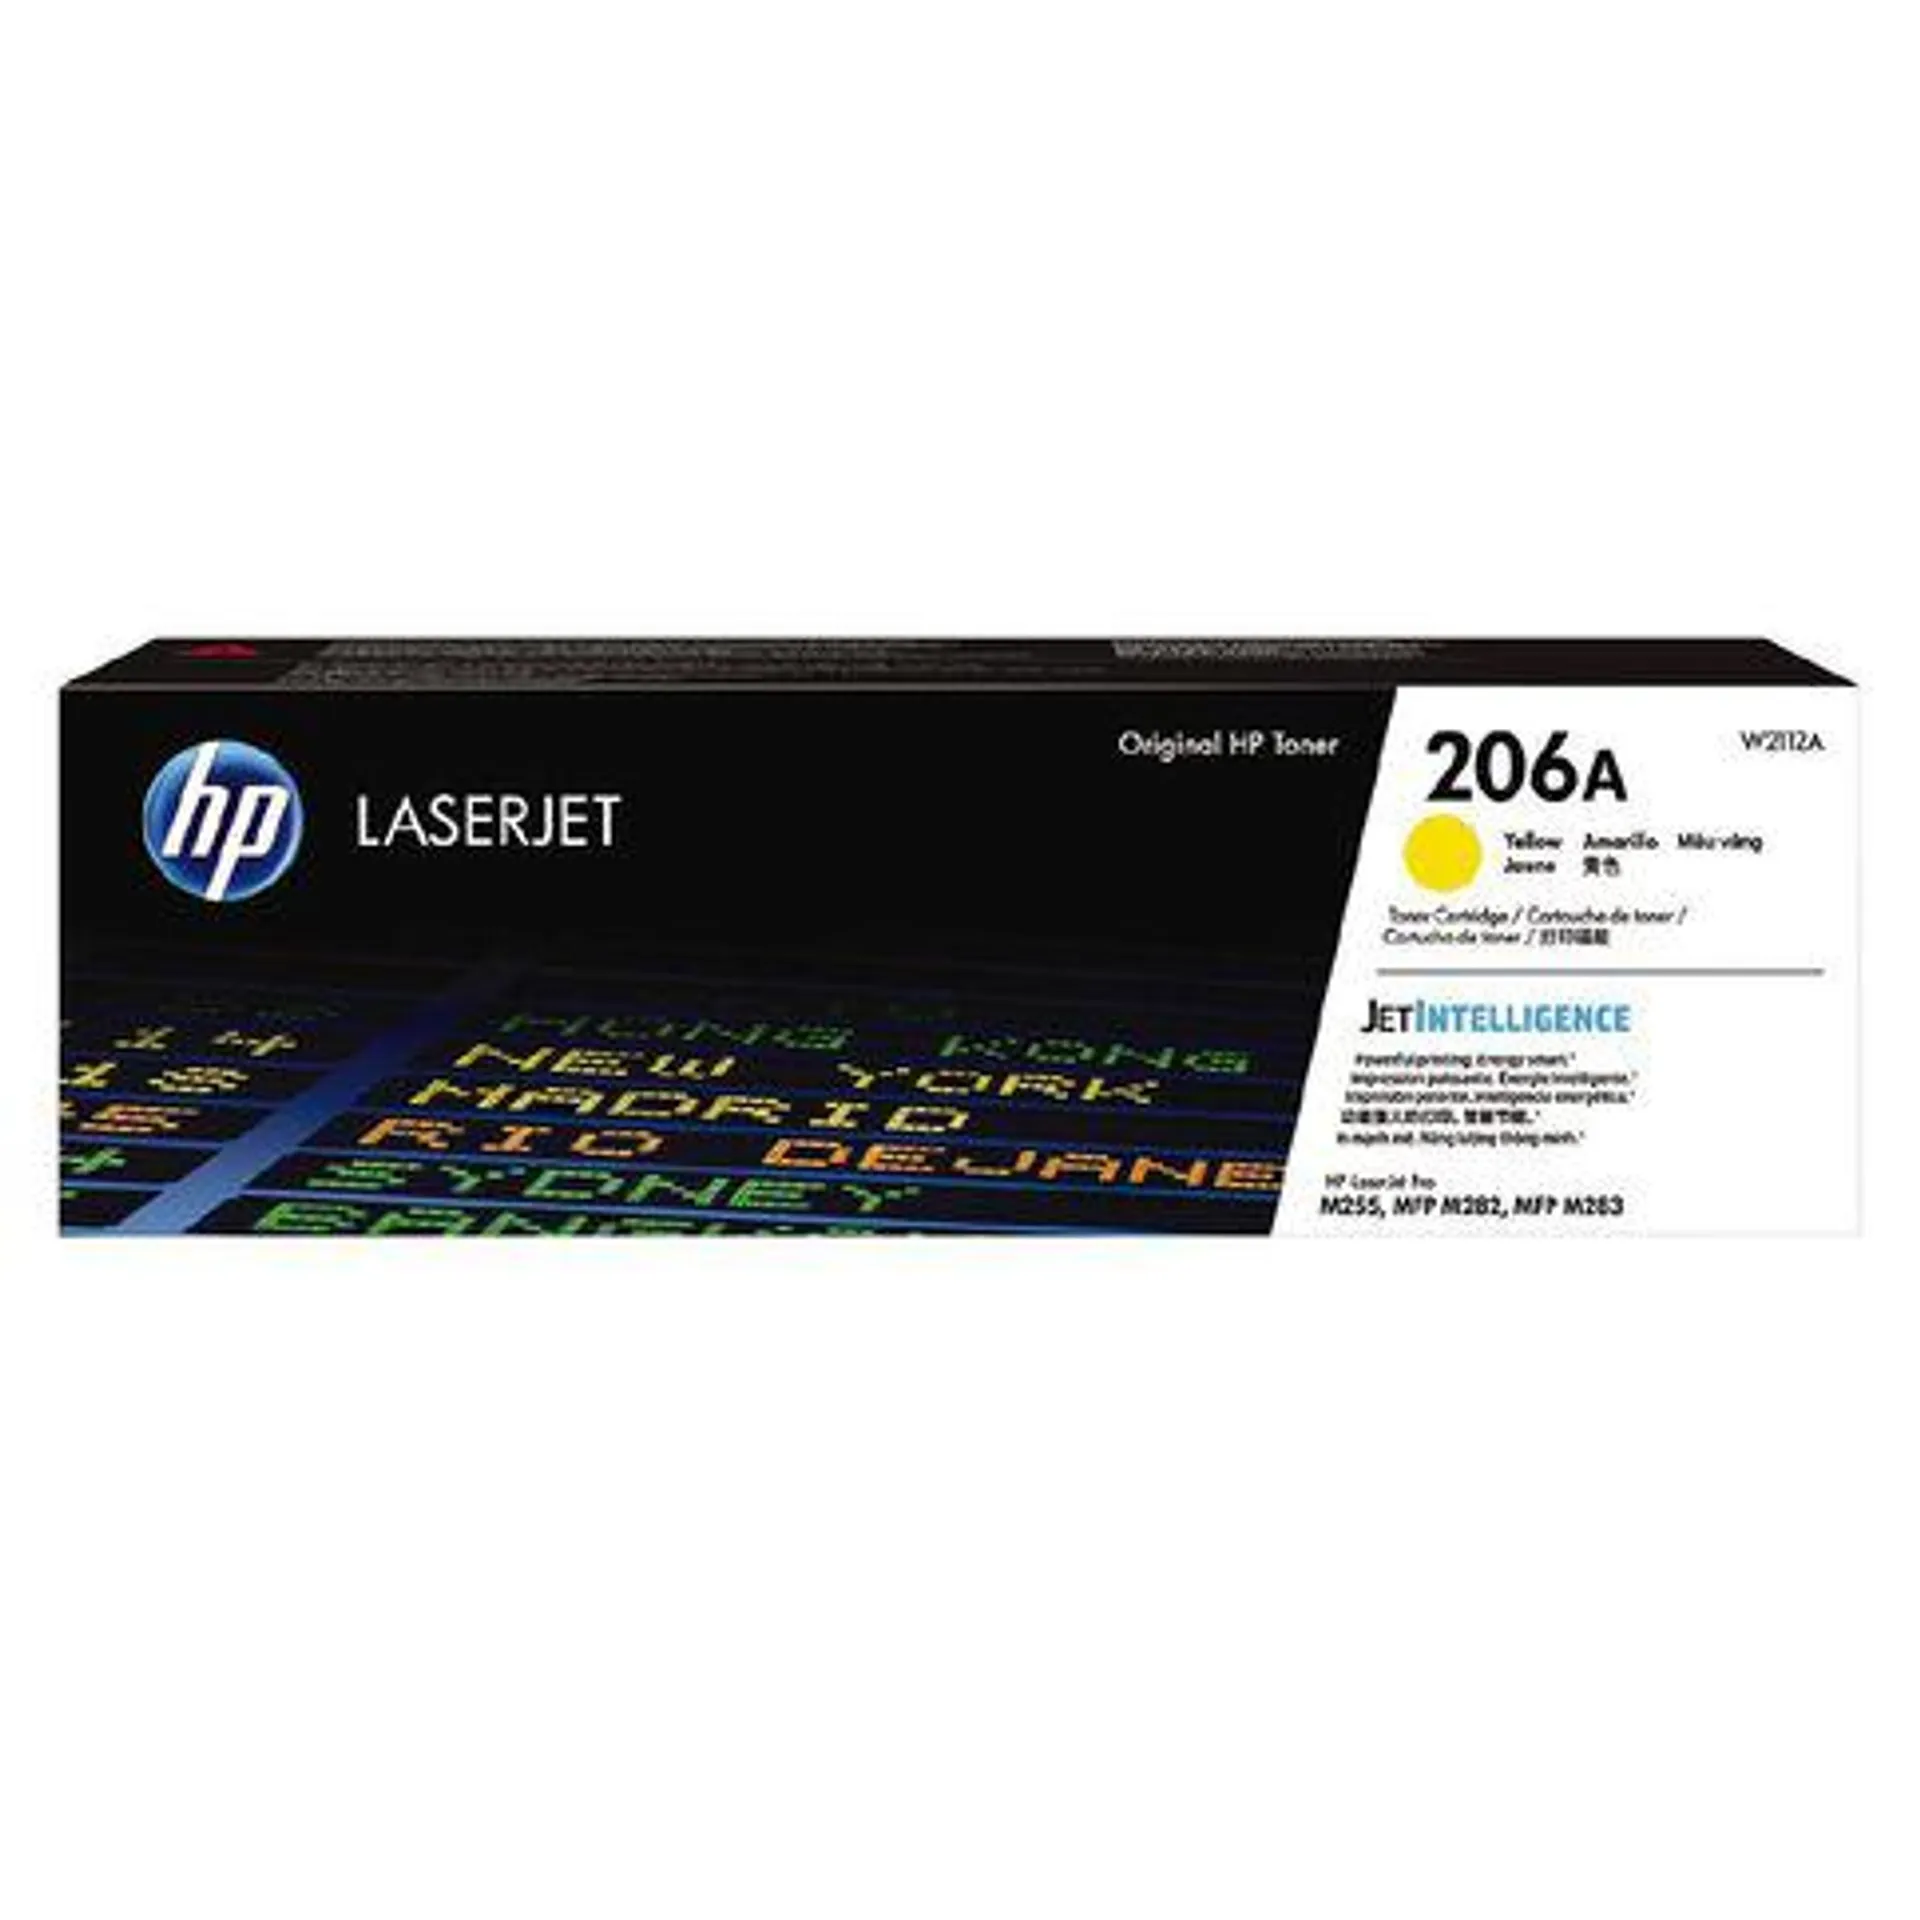 HP Toner 206A Yellow (1250 Pages)